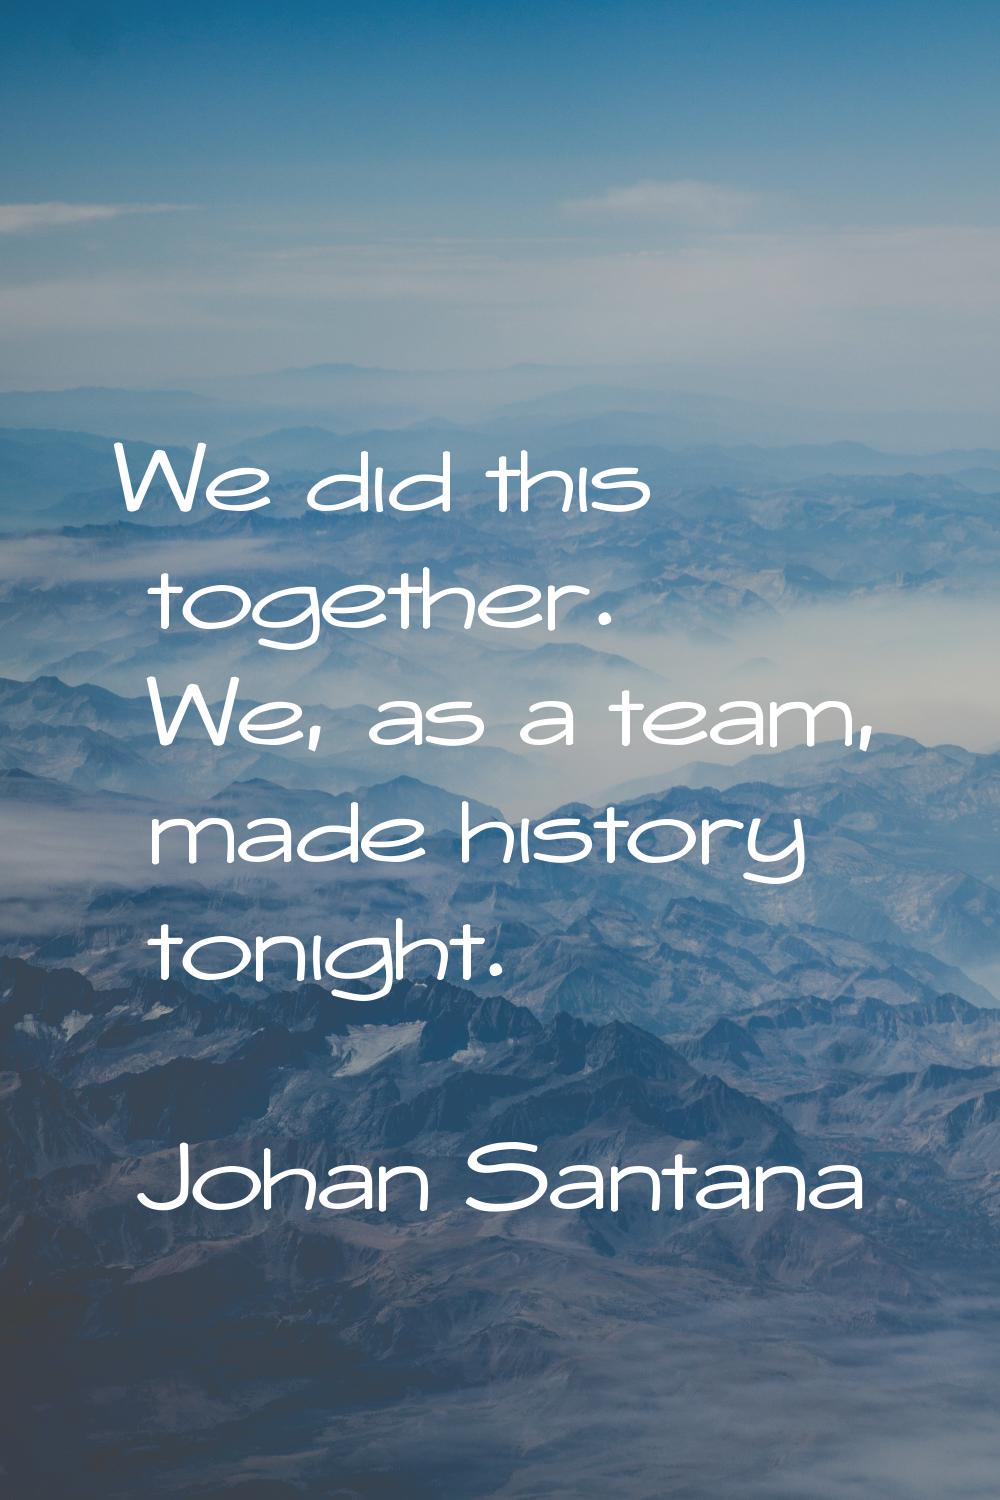 We did this together. We, as a team, made history tonight.